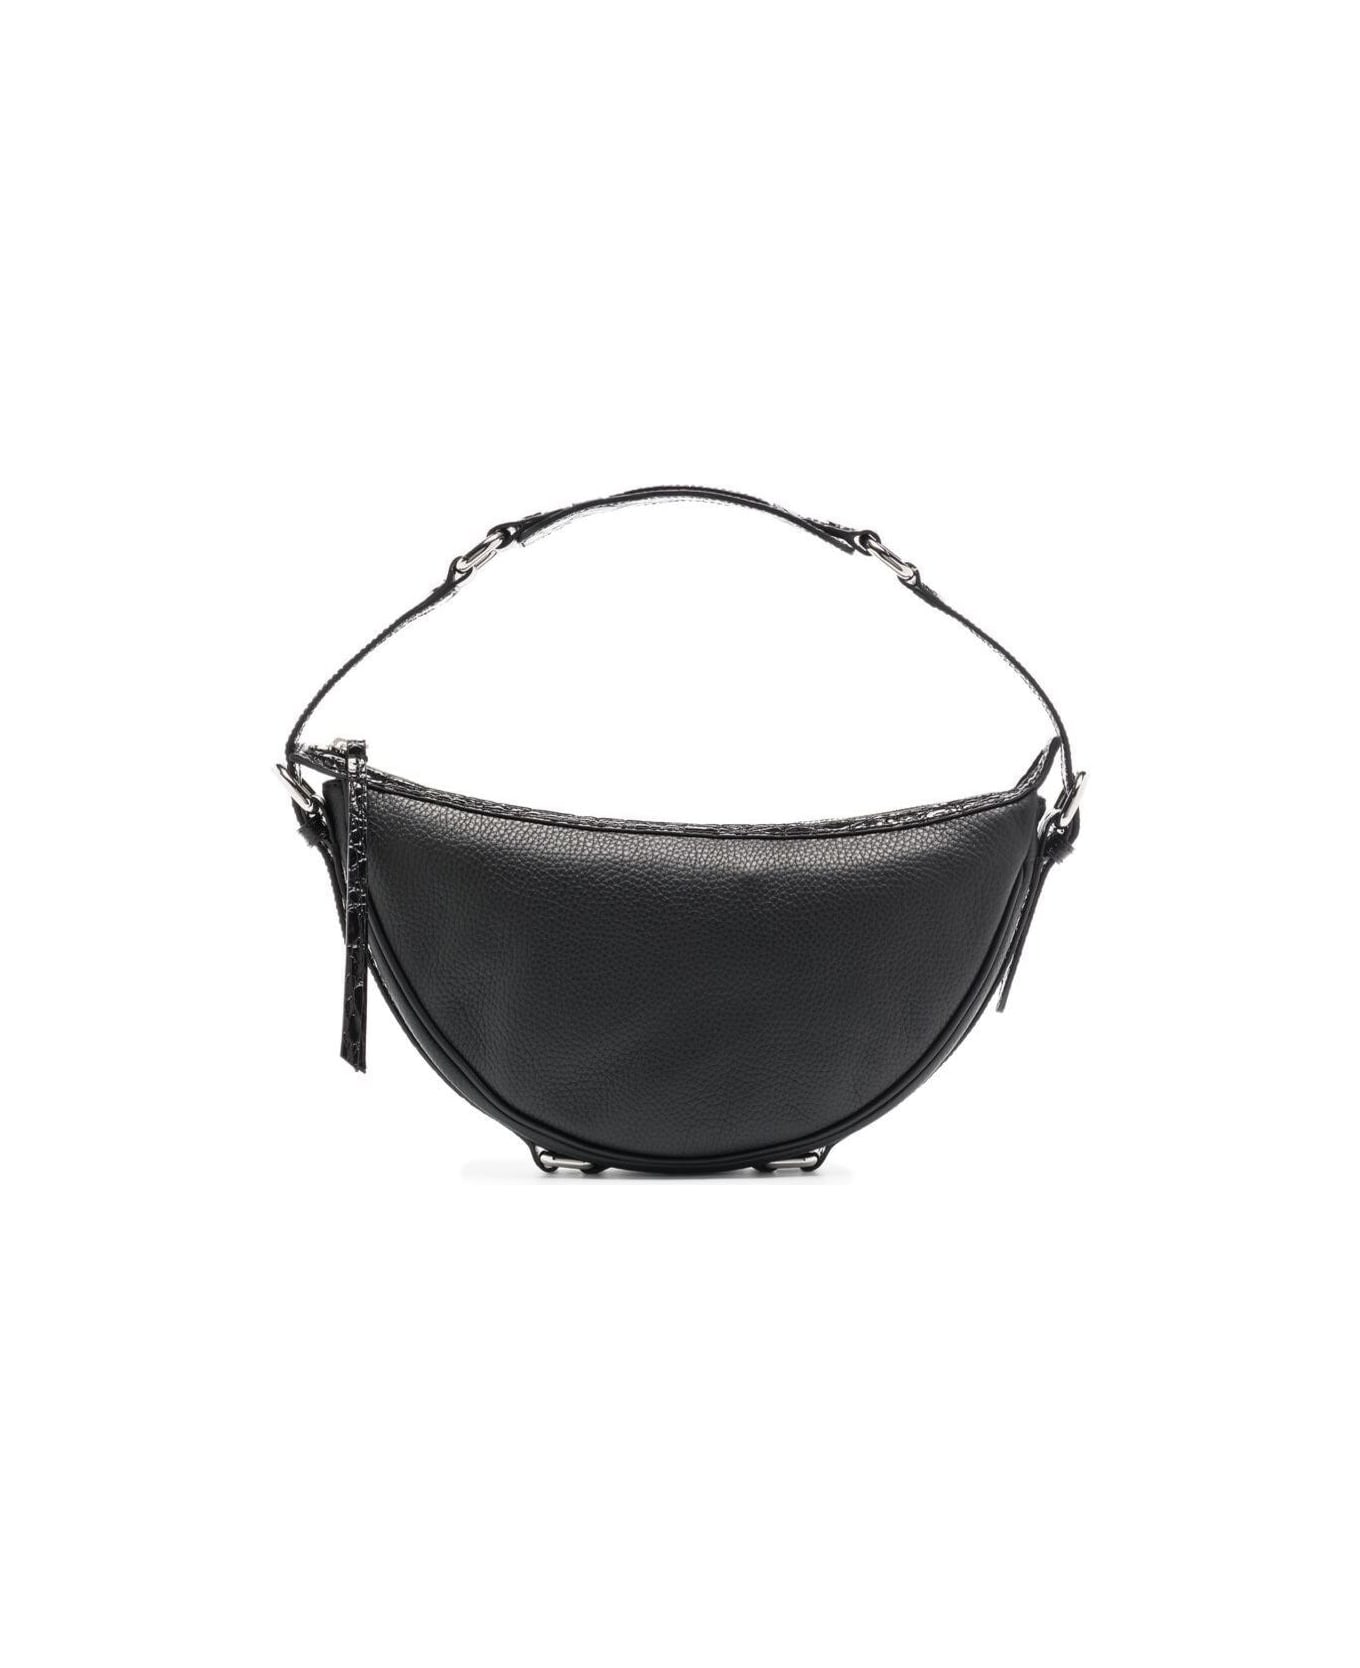 BY FAR Black Leather Handbag With Silver-colored Details Woman - Black